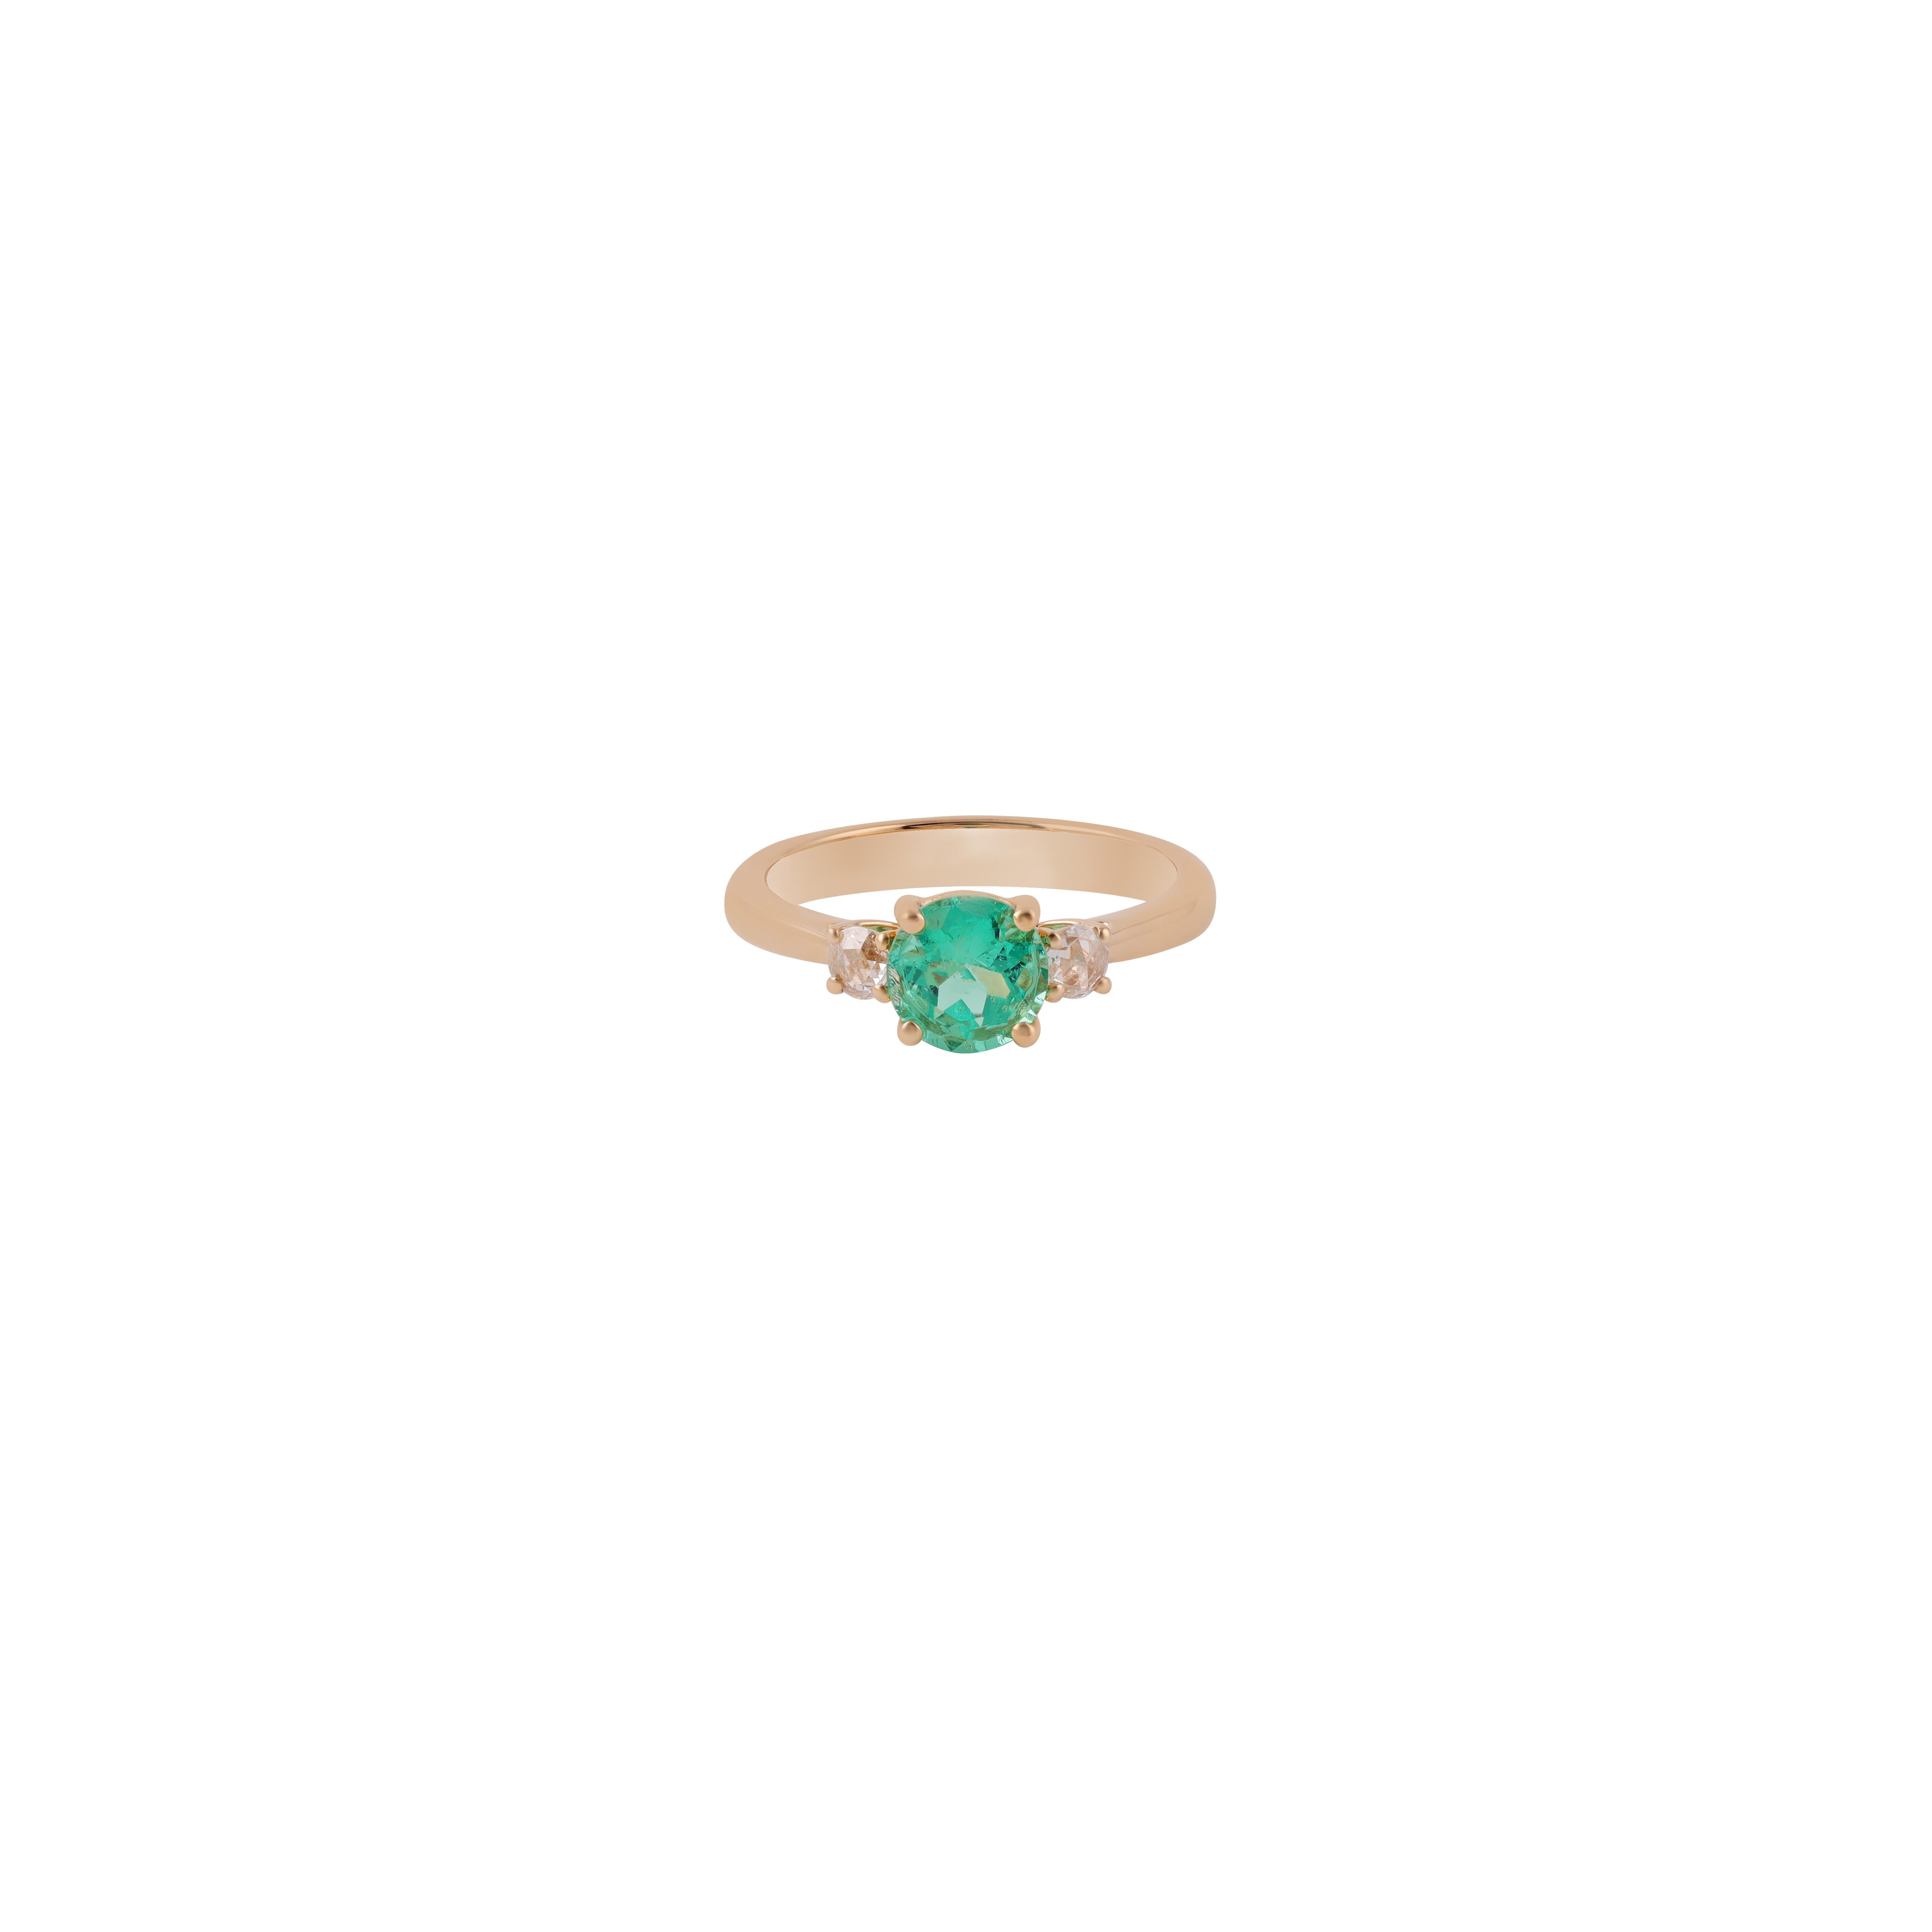 Magnificent Colombian Emerald ring.  
Colombian Emerald & Diamond Ring 18K Yellow Gold 


Colombian Emerald - 0.97 Carat
Diamond - 0.13 Carat 
18 Karat Yellow Gold - 3.45 Grams



Custom Services
Resizing is available.
Request Customization
